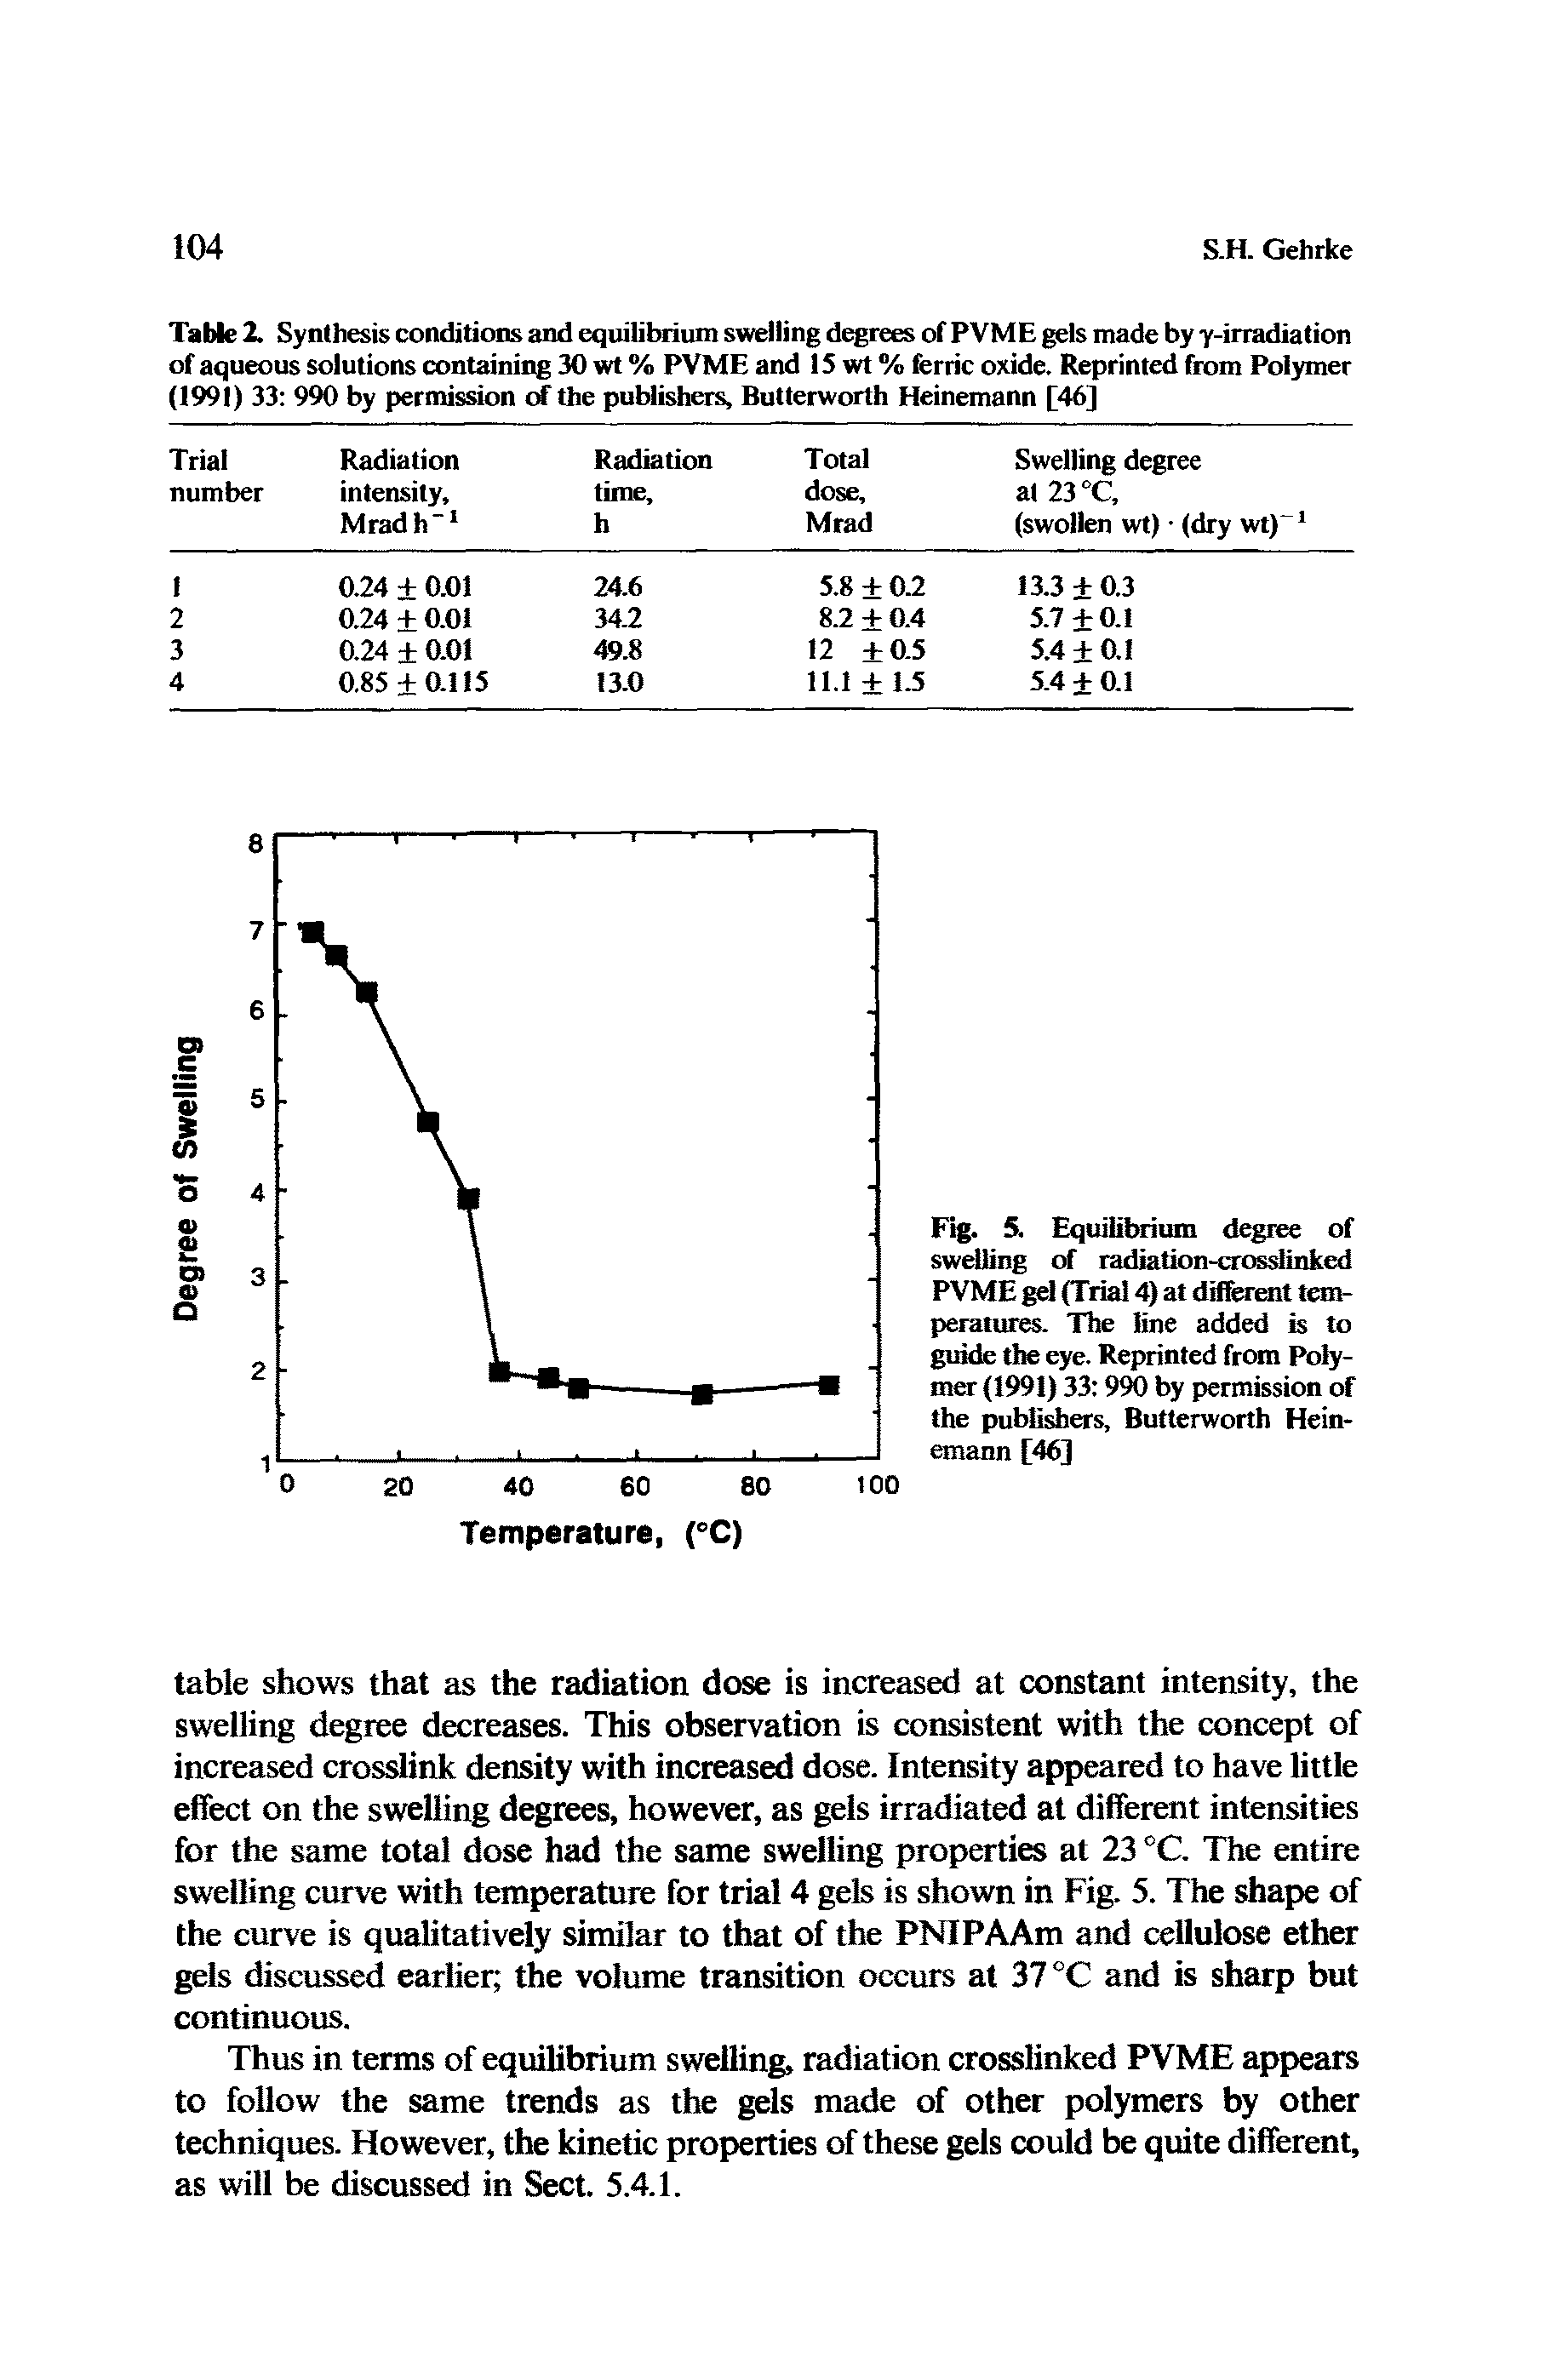 Fig. 5. Equilibrium degree of swelling of radiation-crosslinked PVME gel (Trial 4) at different temperatures. The line added is to guide the eye. Reprinted from Polymer (1991) 33 990 by permission of the publishers, Butterworth Heinemann [46]...